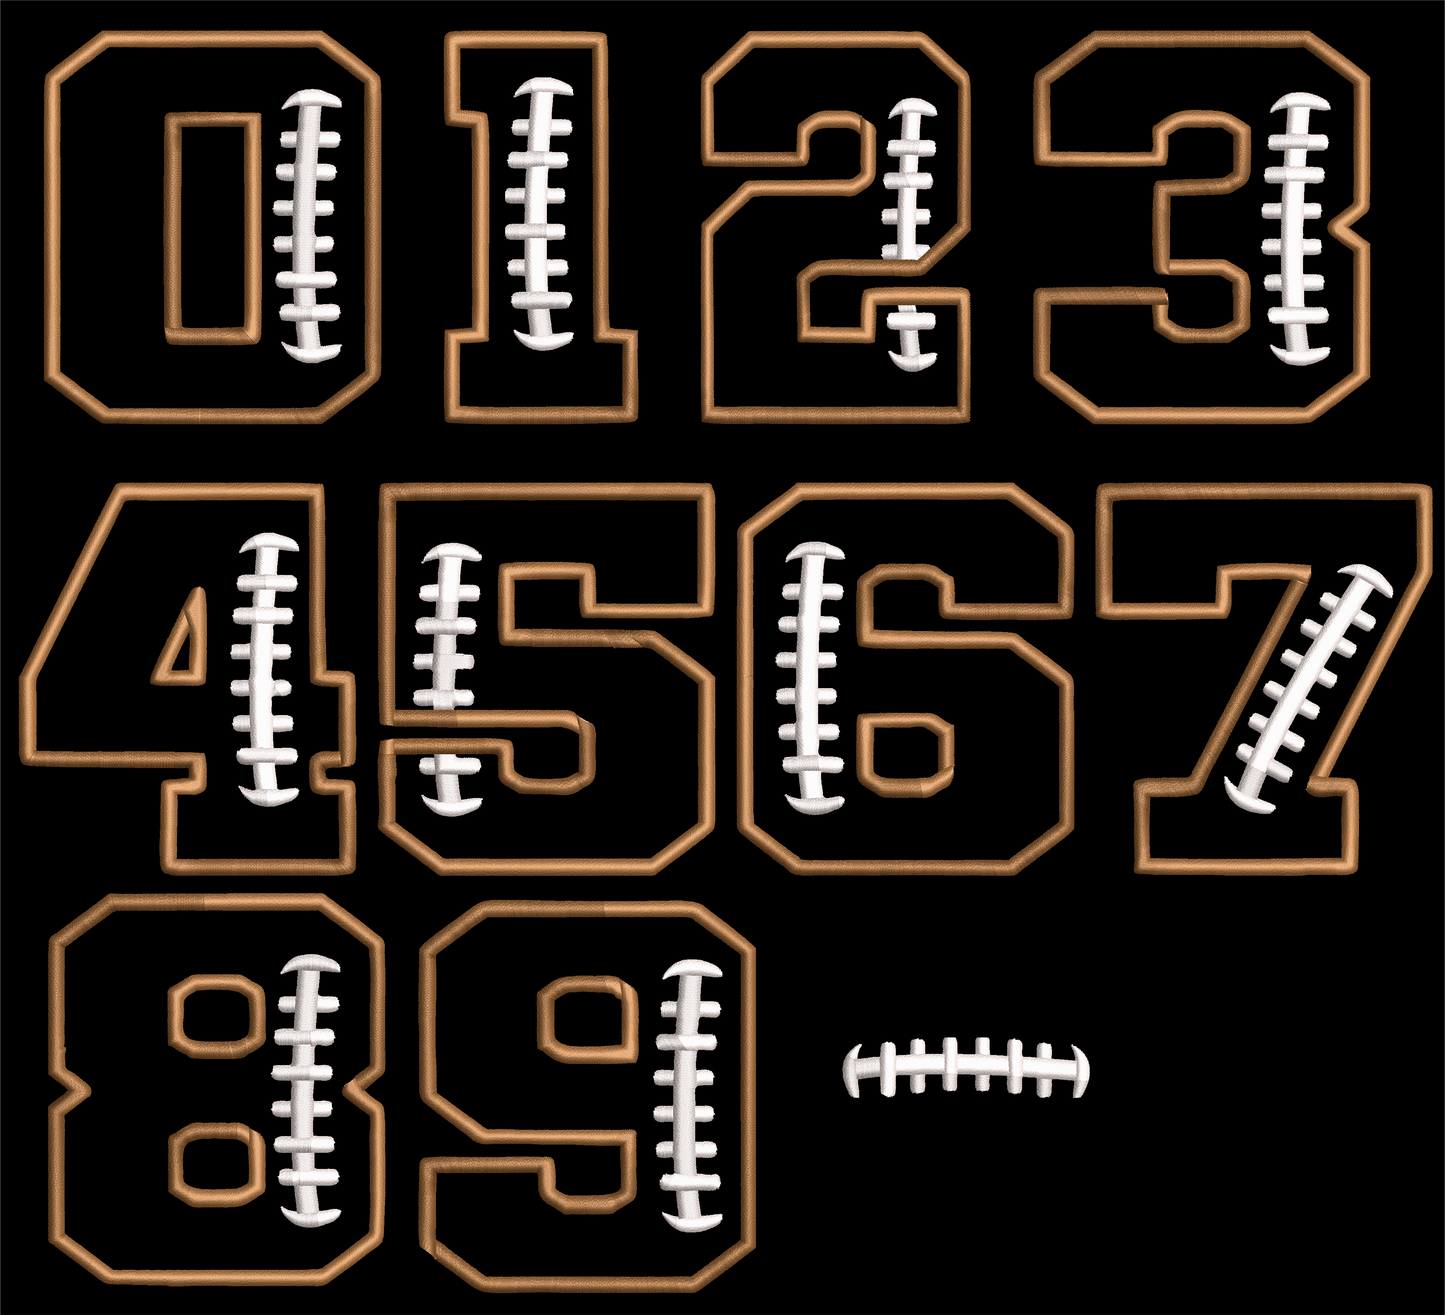 0-9 FOOTBALL NUMBERS DST